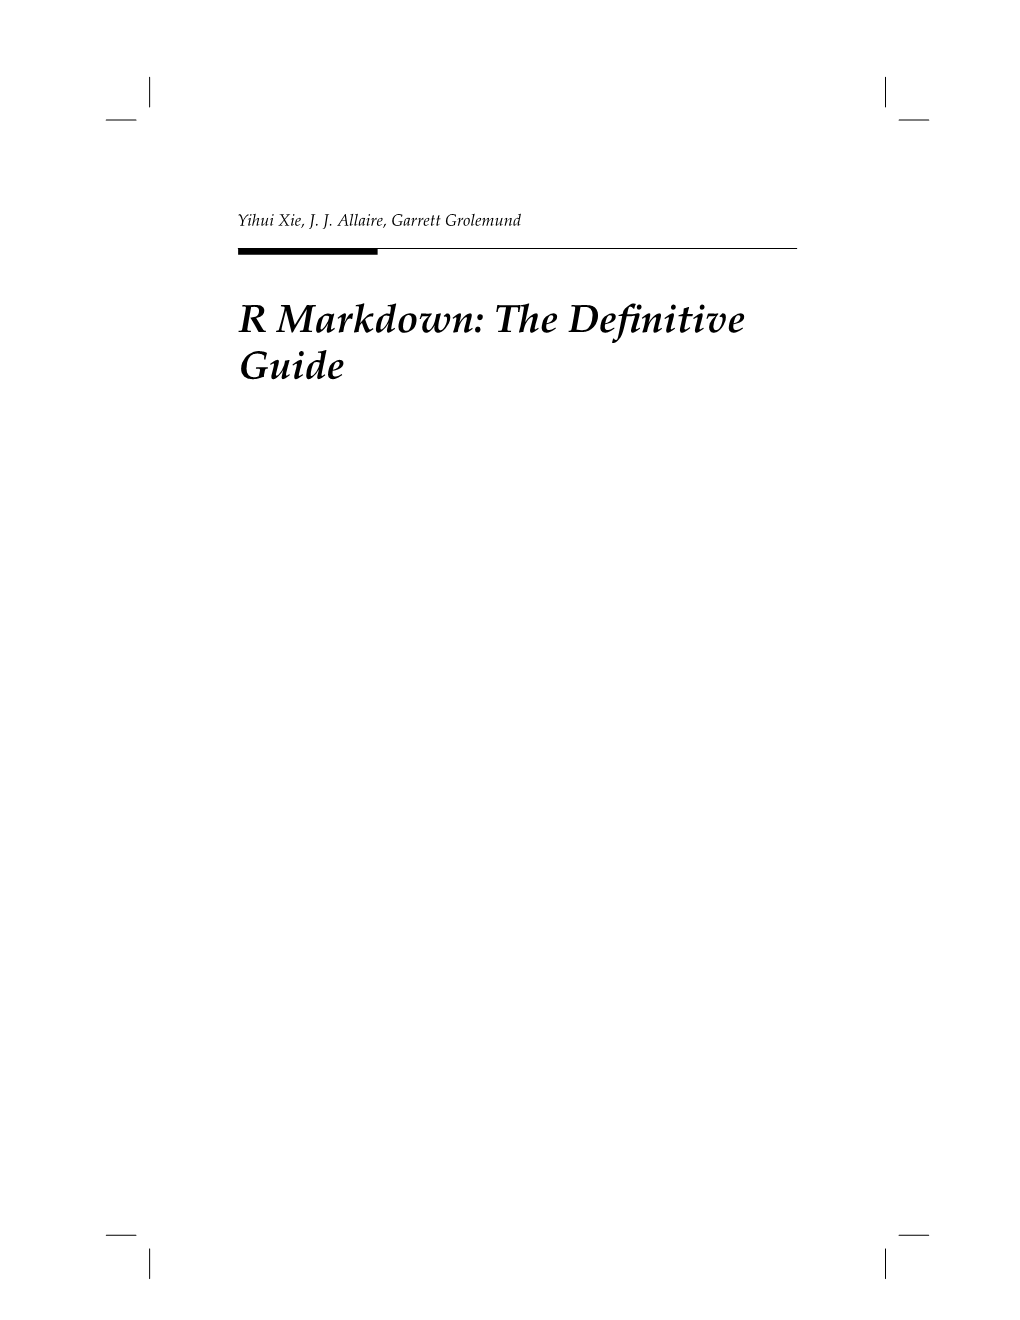 R Markdown: the Definitive Guide